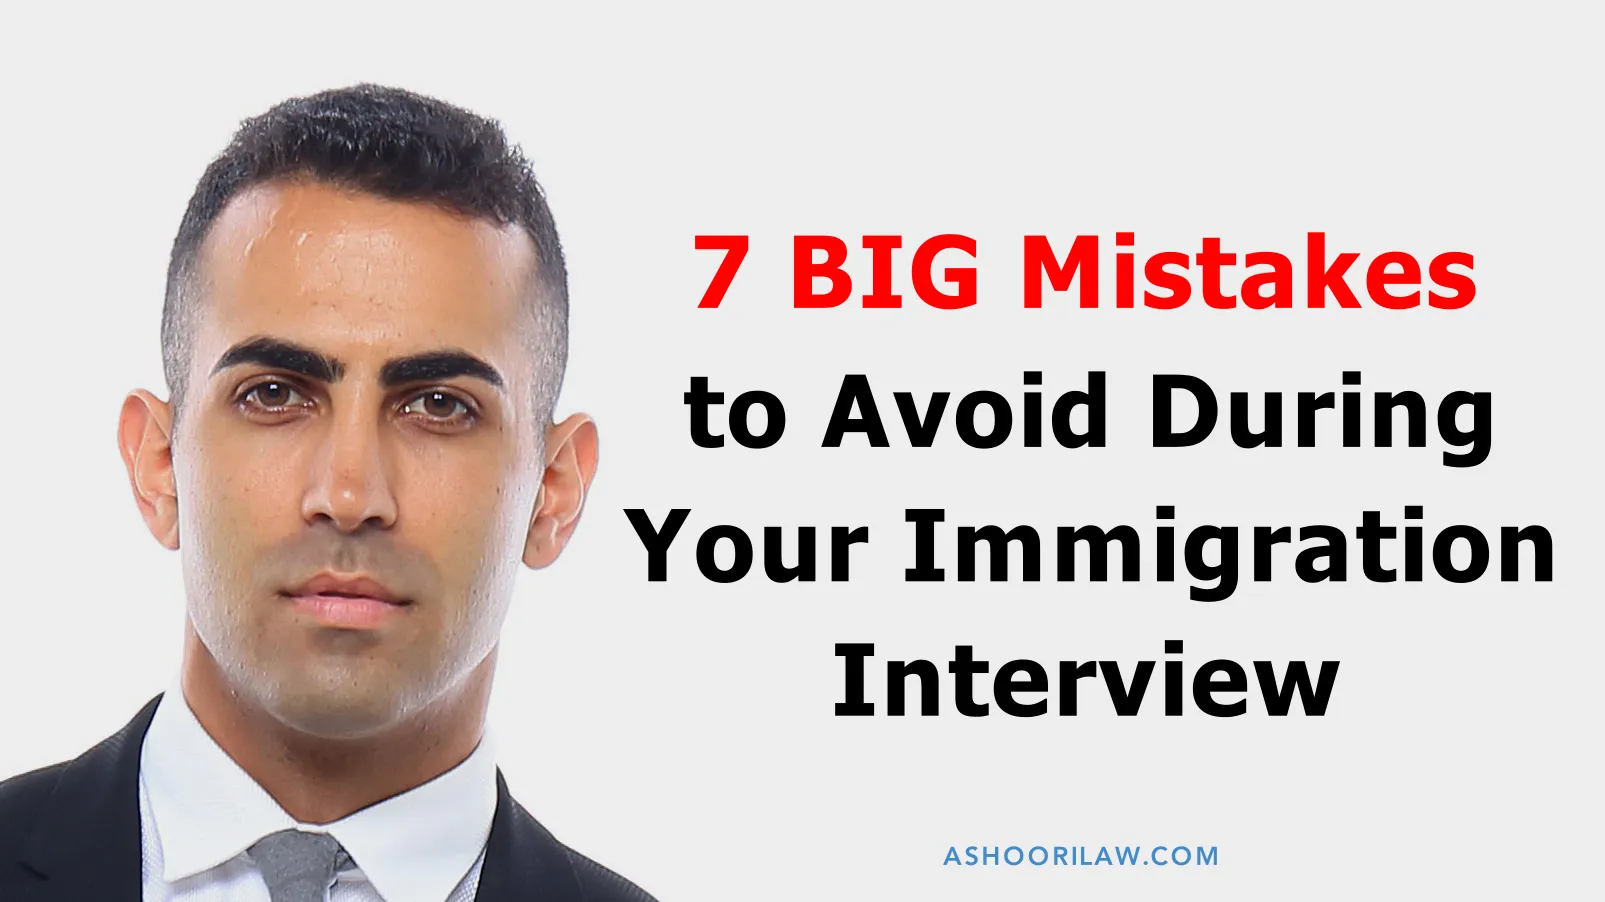 7 Big Mistakes to Avoid During Your Immigration Interview 3